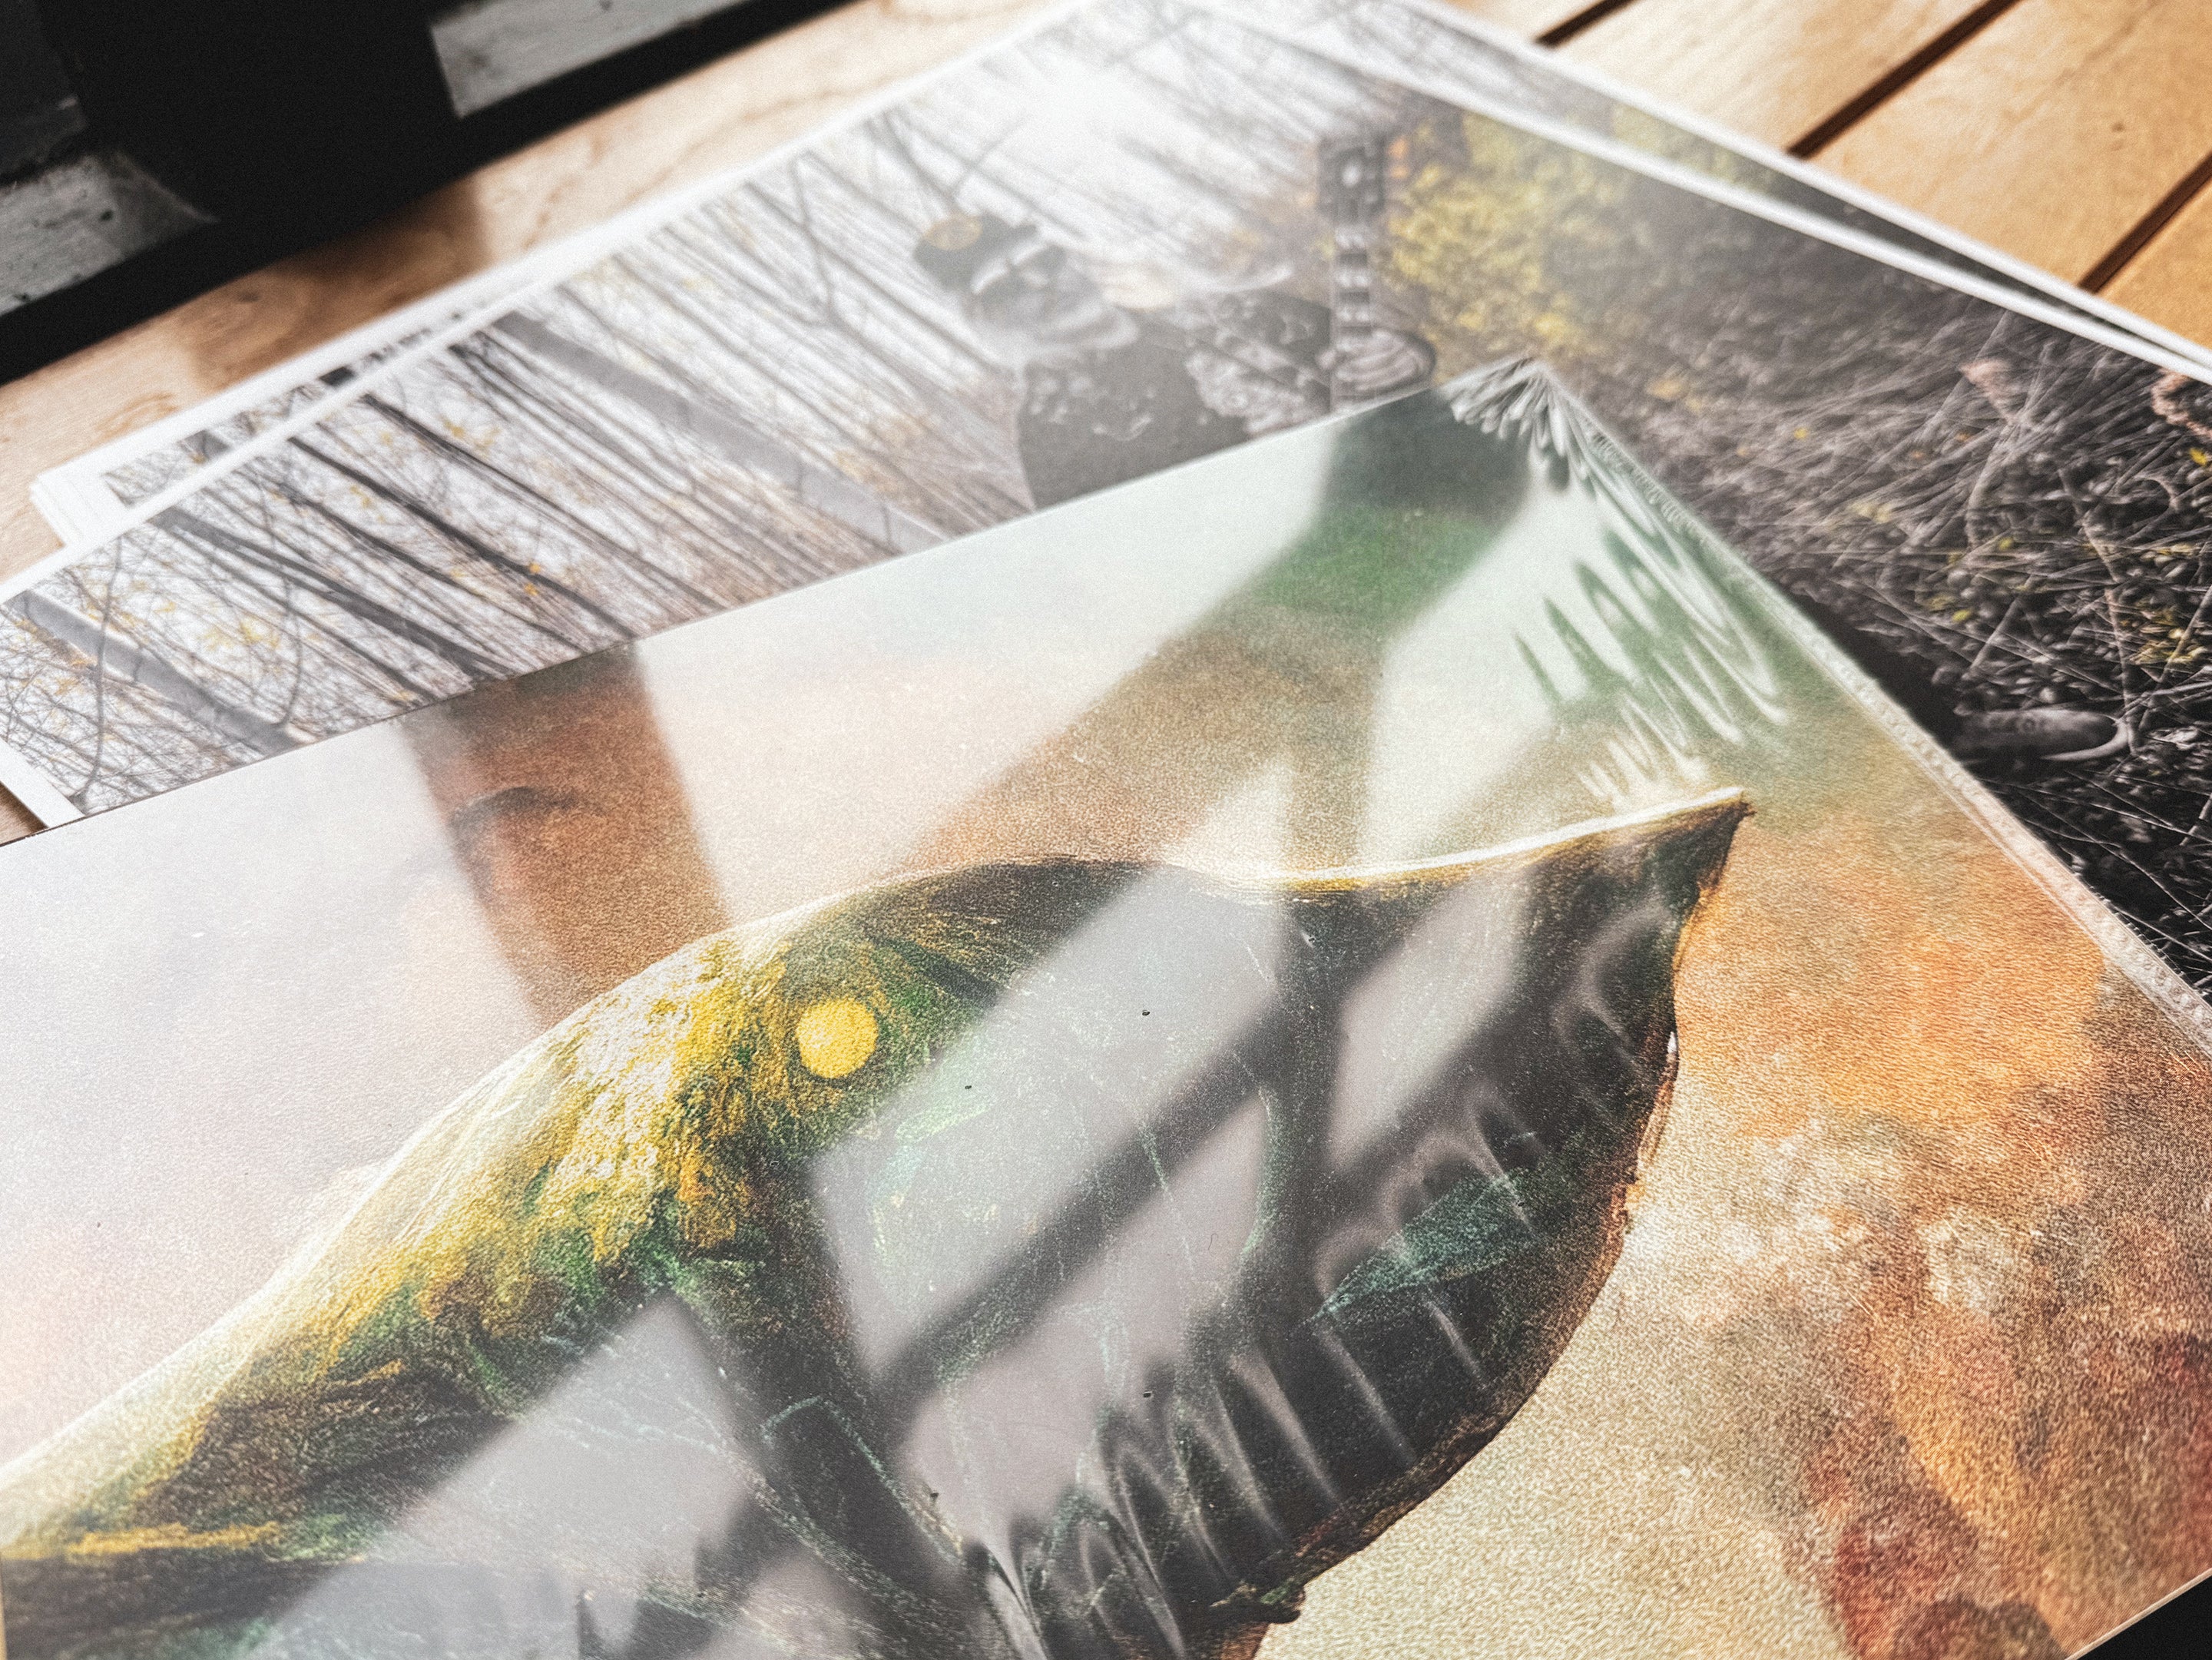 Records of the Week: Plantoid, J Mascis, Soft Walls and The Last Dinner Party.